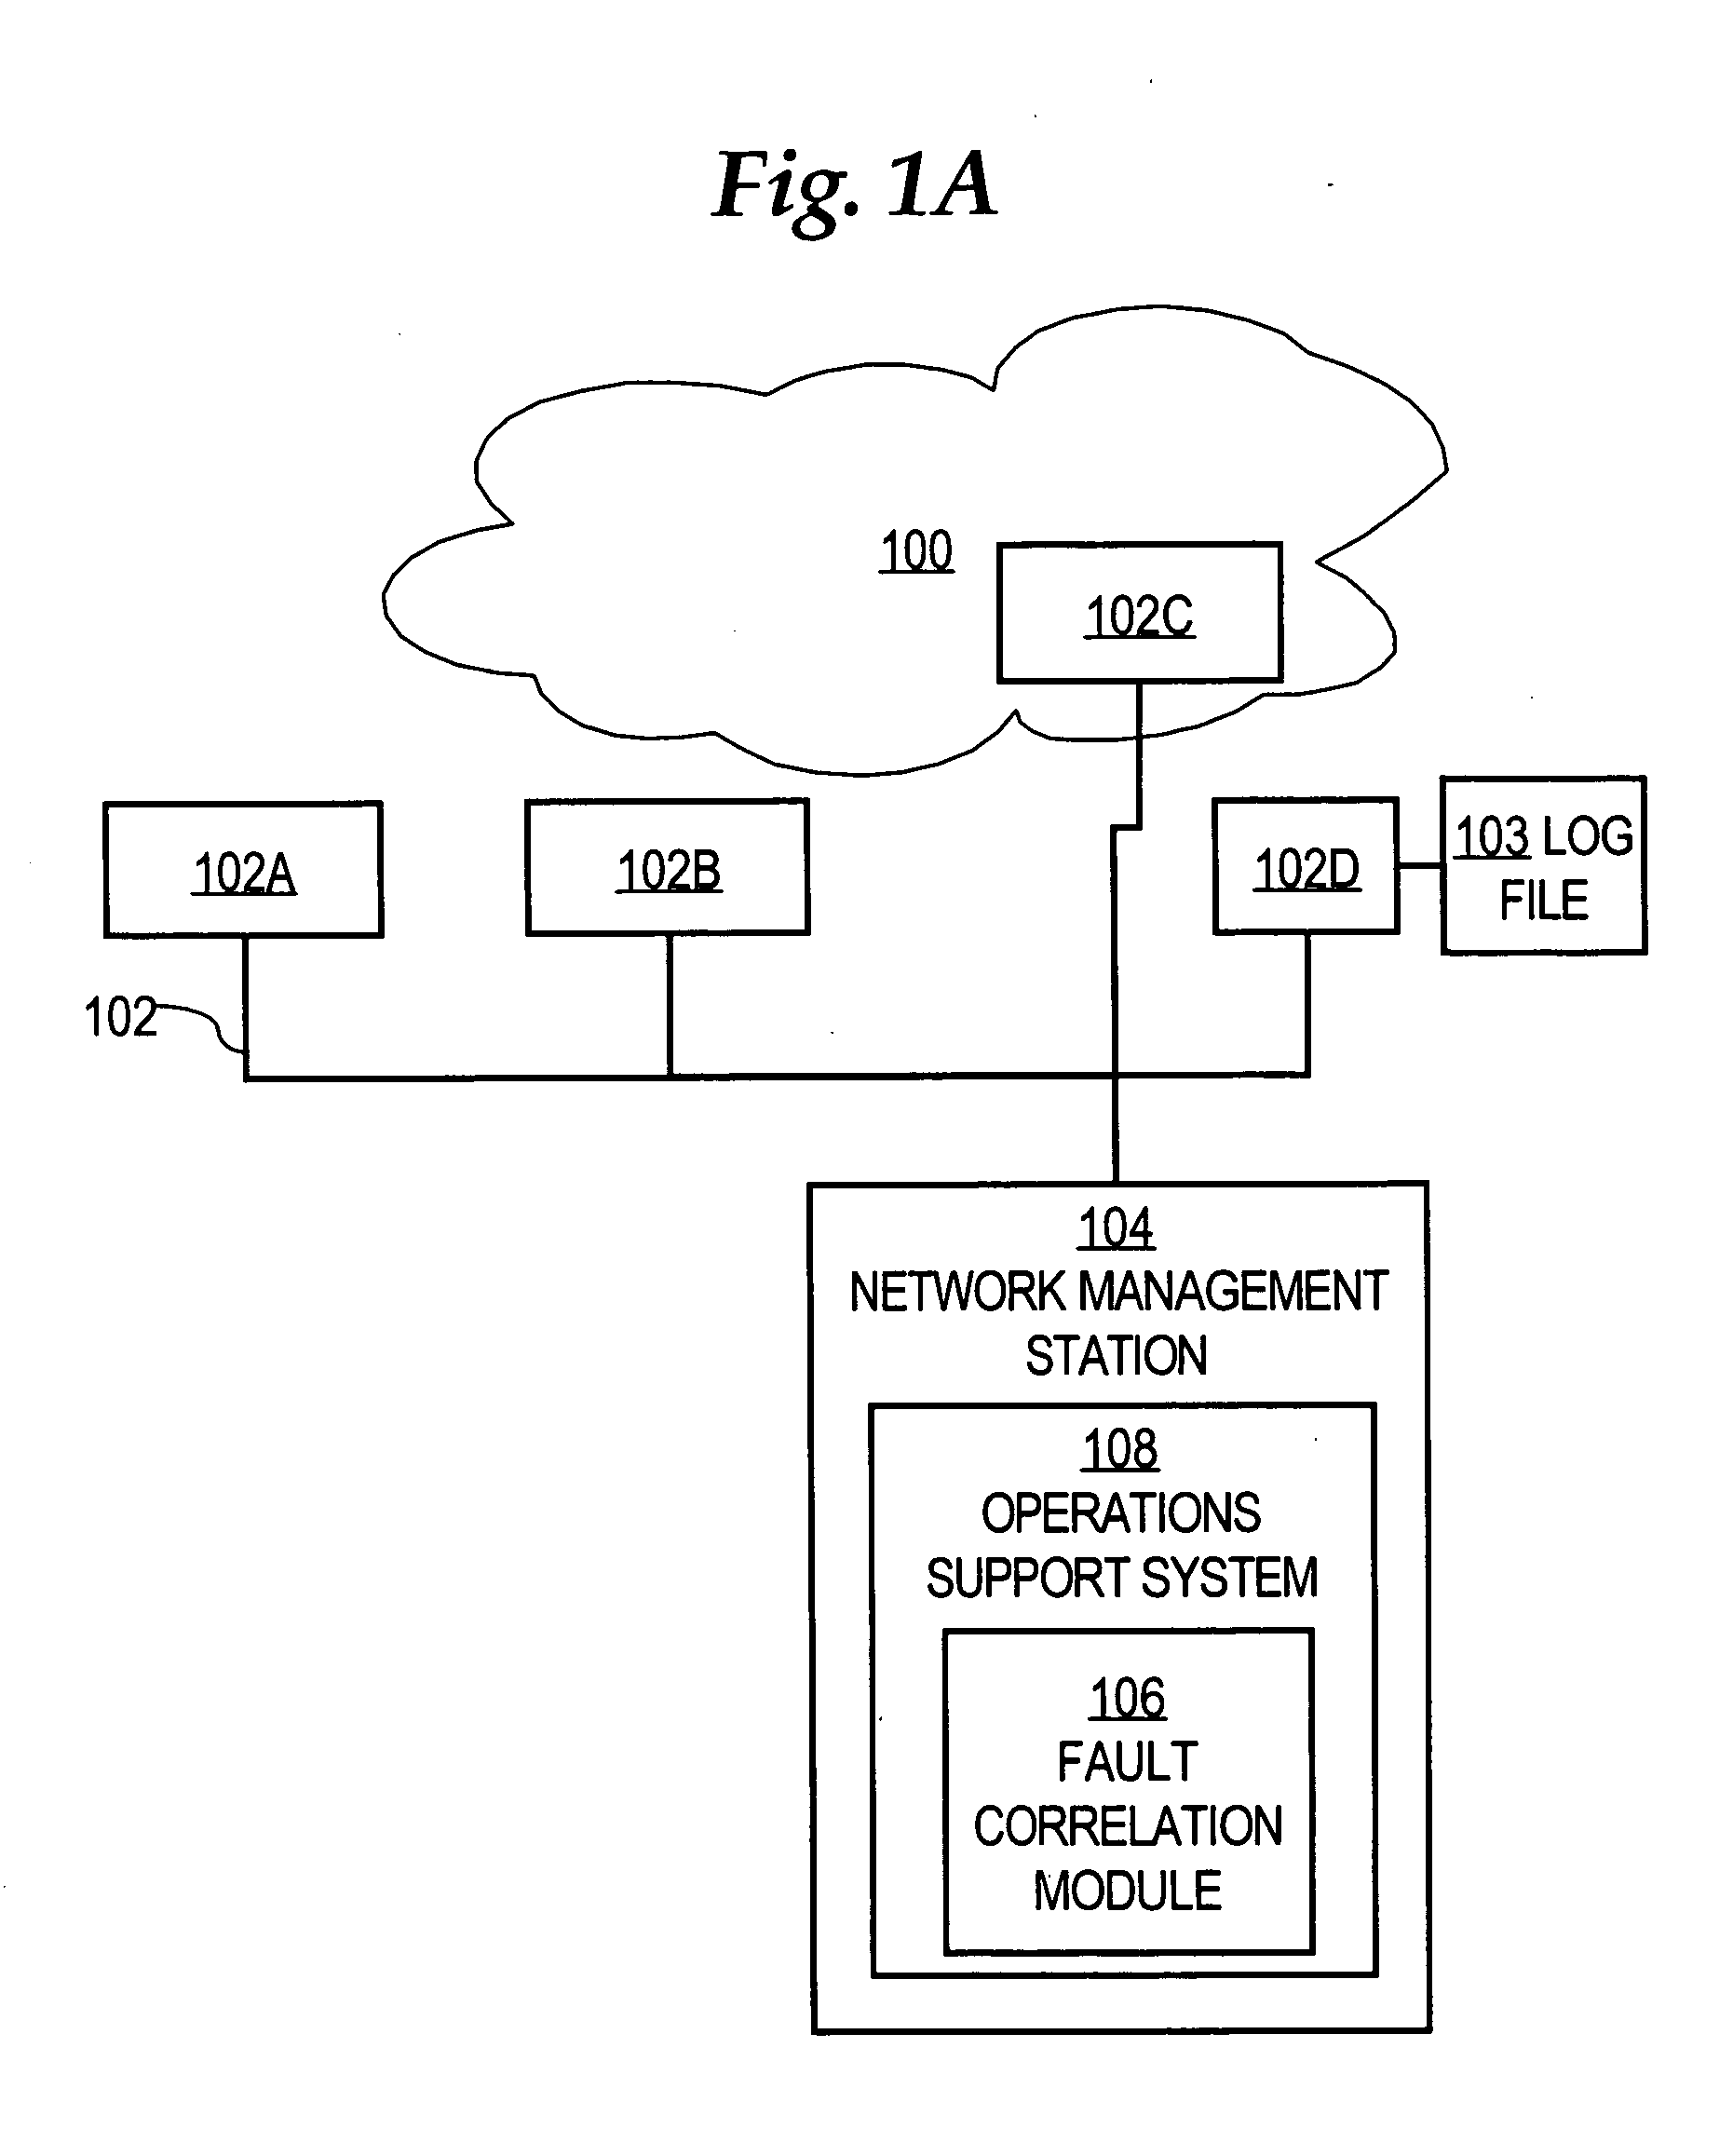 Method of labeling alarms to facilitate correlating alarms in a telecommunications network